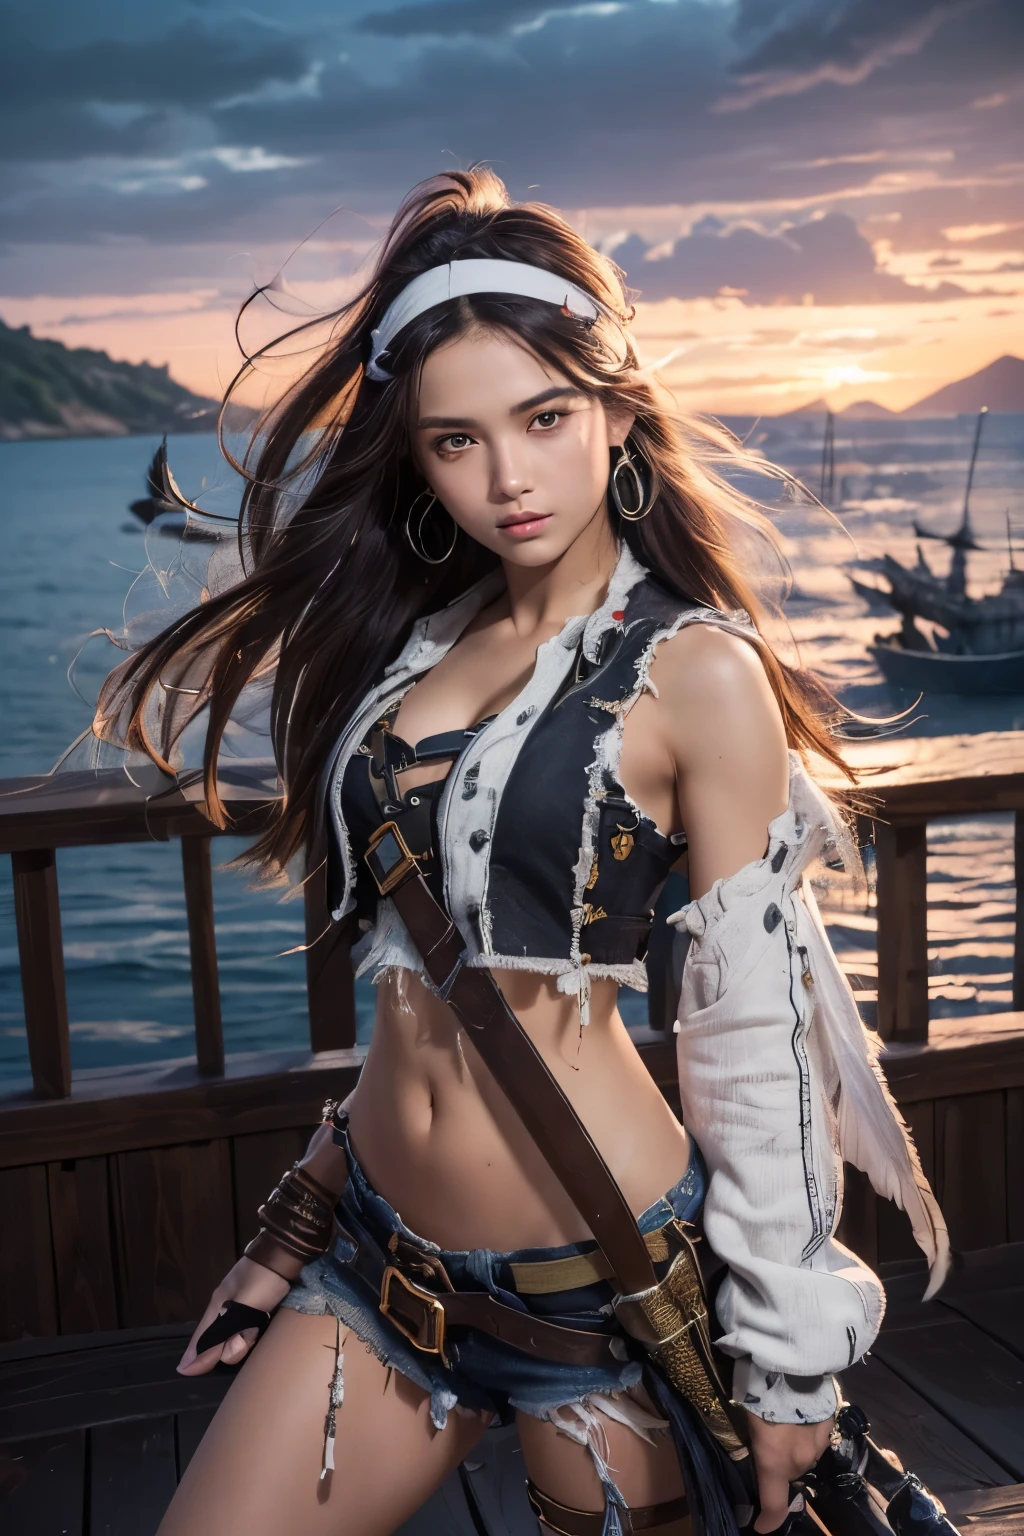 (Ultra quality:1.2), (Ultra detailed:1.2), (Ultra detailed clothes:1.2), (Ultra detailed face:1.2), (Ultra detailed eyes:1.2), (Ultra detailed body:1.2), (Ultra detailed weapons:1.2), young pirate girls, standing on the deck, torn clothes, using headband, accesories made with bird's feather,, different hair colors, pistol fights, battlefield in the background, fire in the background, night, epic light, dramatic sky